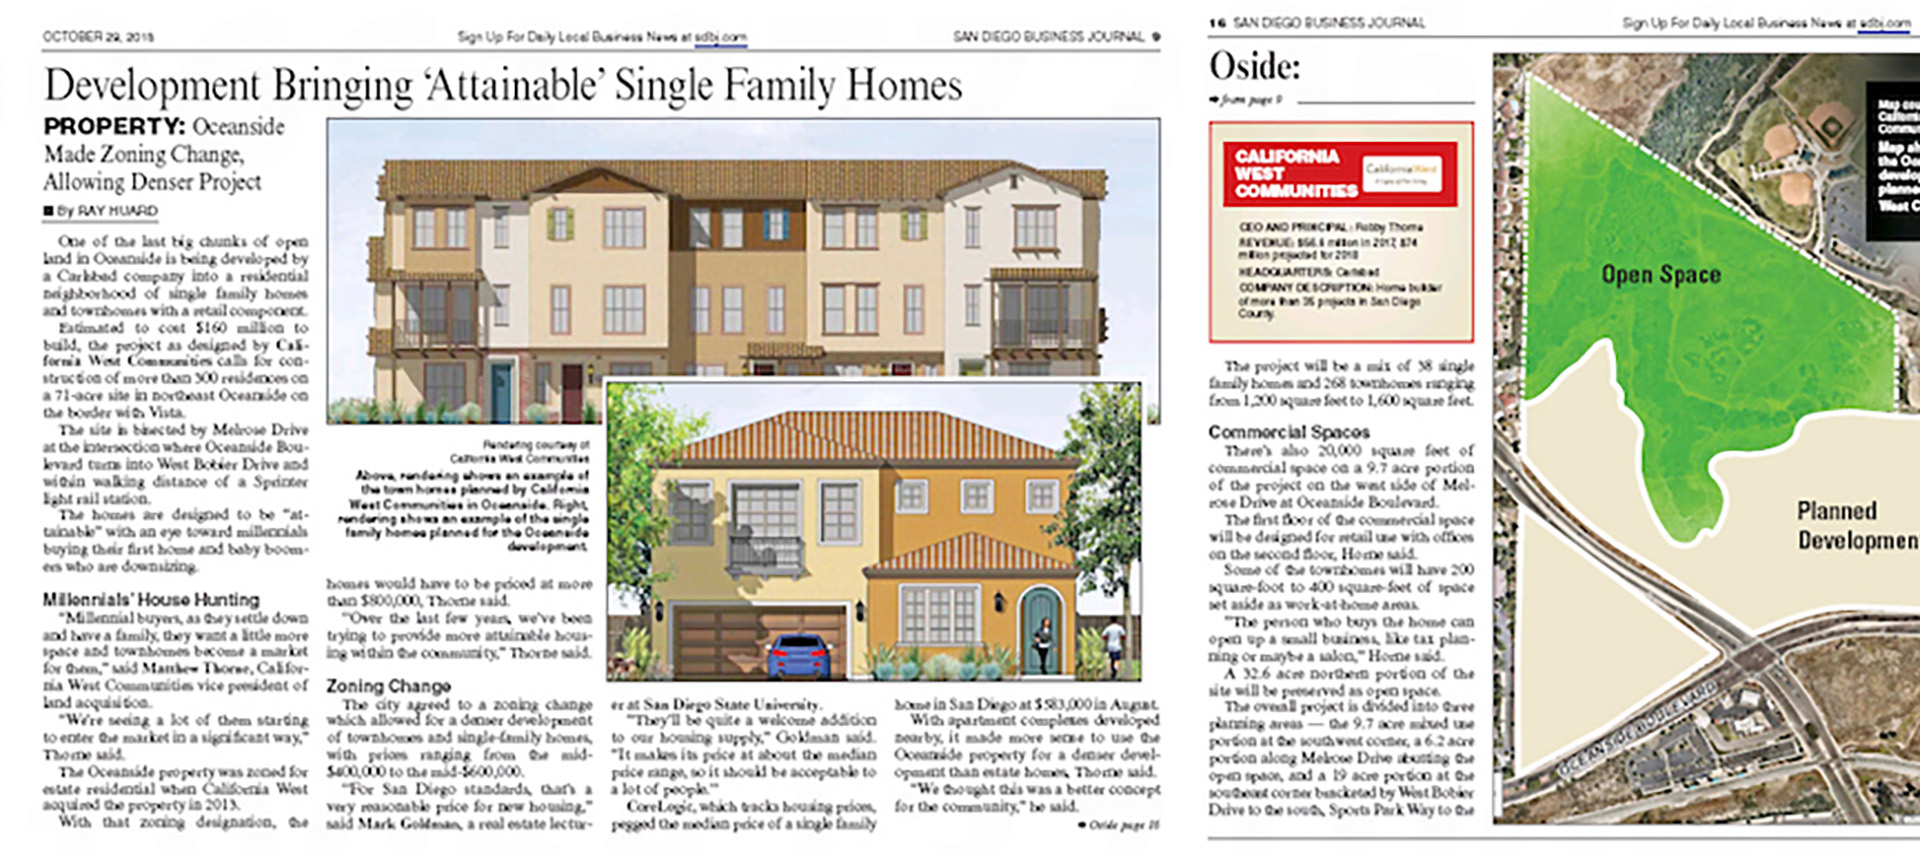 Image of SDBJ's "Development Bringing ‘Attainable’ Single Family Homes" Article